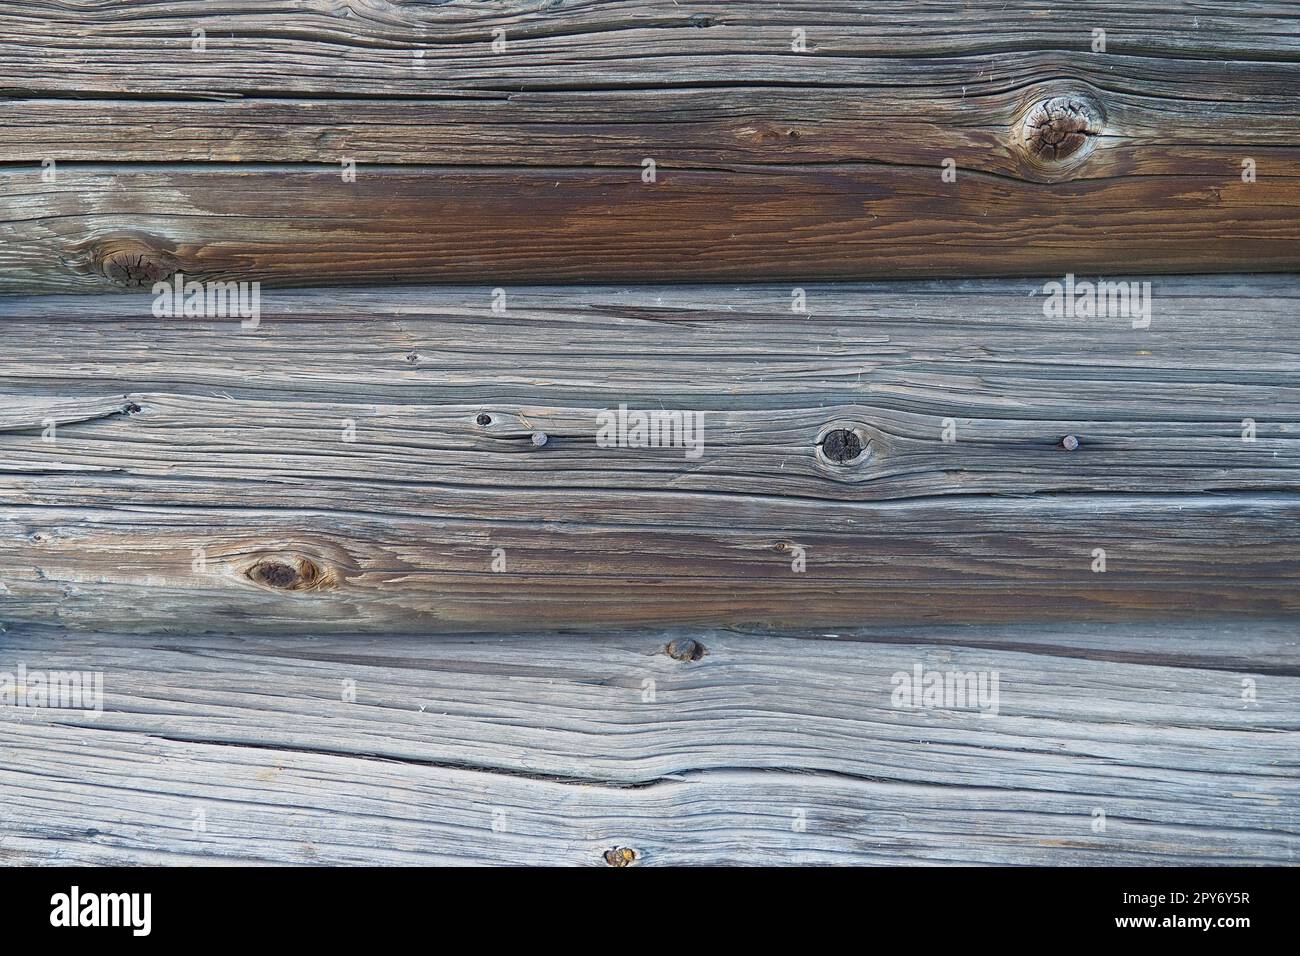 Background horizontal logs. Wooden background from shabby boards and logs. Round lumber assortment. General purpose lumber. Special type of forest products. Knots and branches. Stock Photo